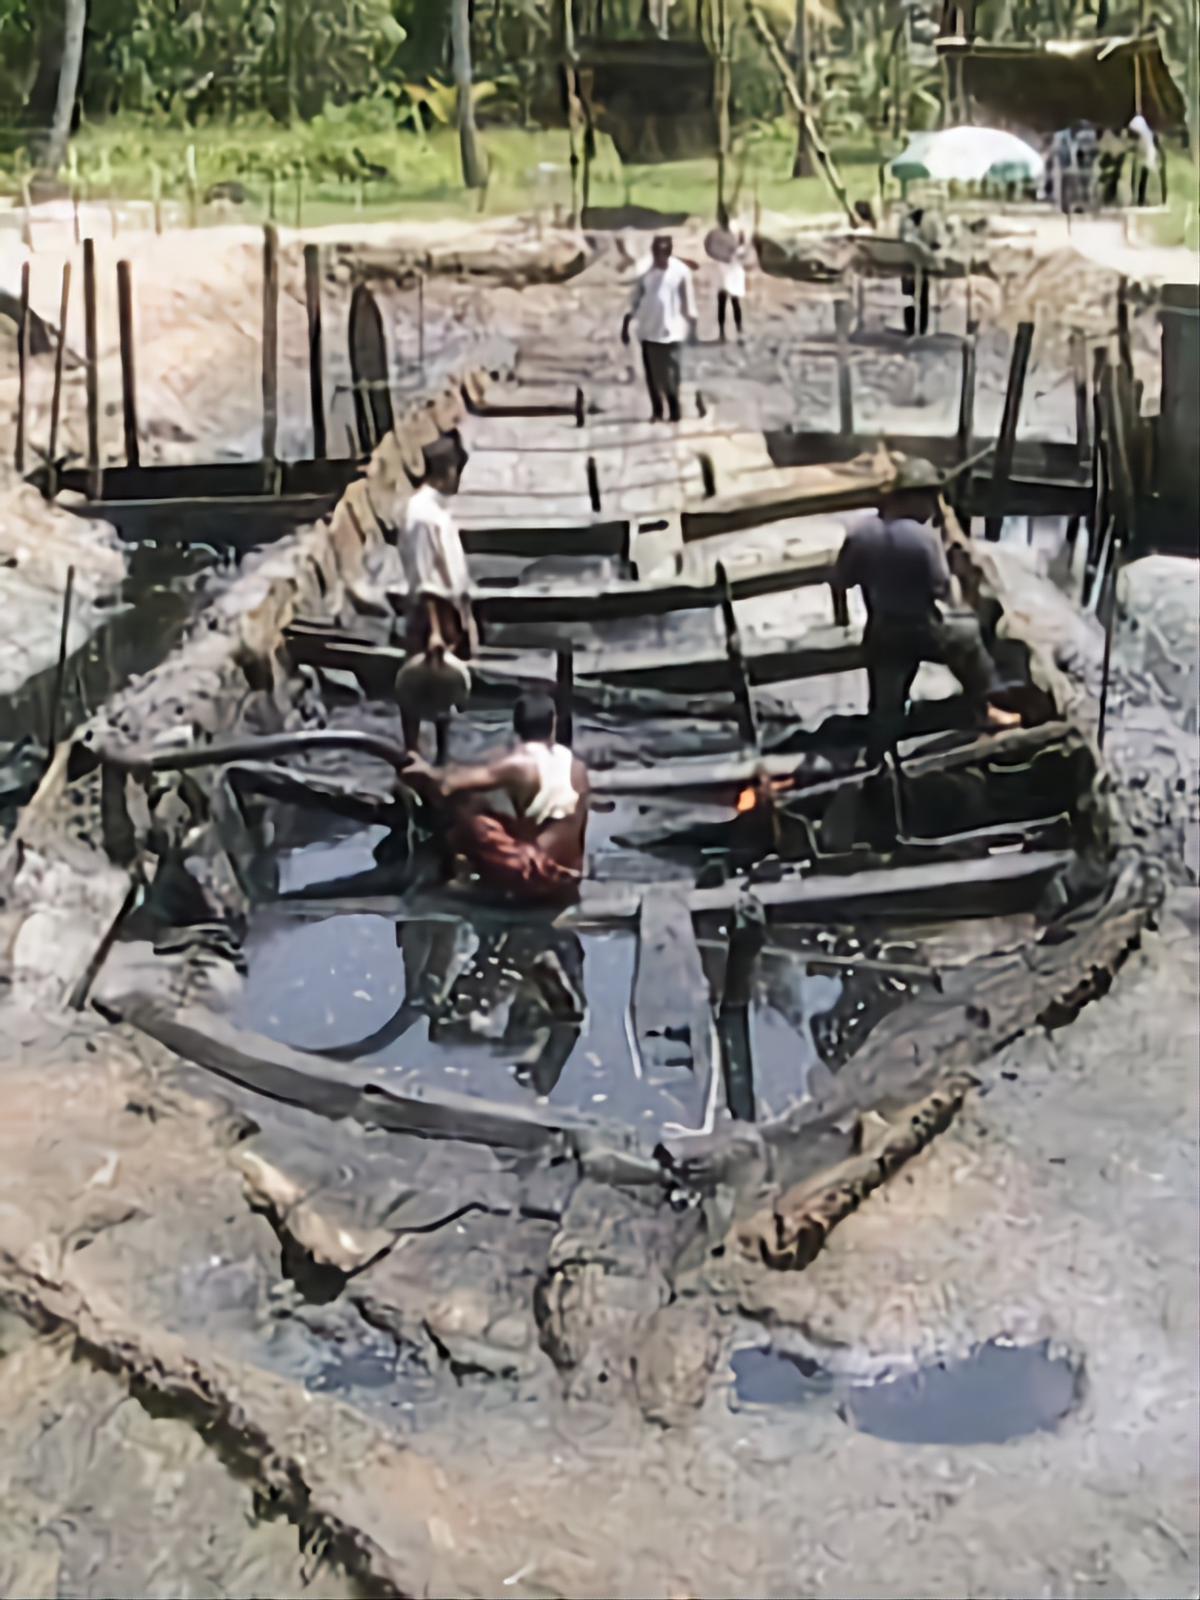 Plan to conserve centuries-old vessel at shipwreck site in Alappuzha goes awry